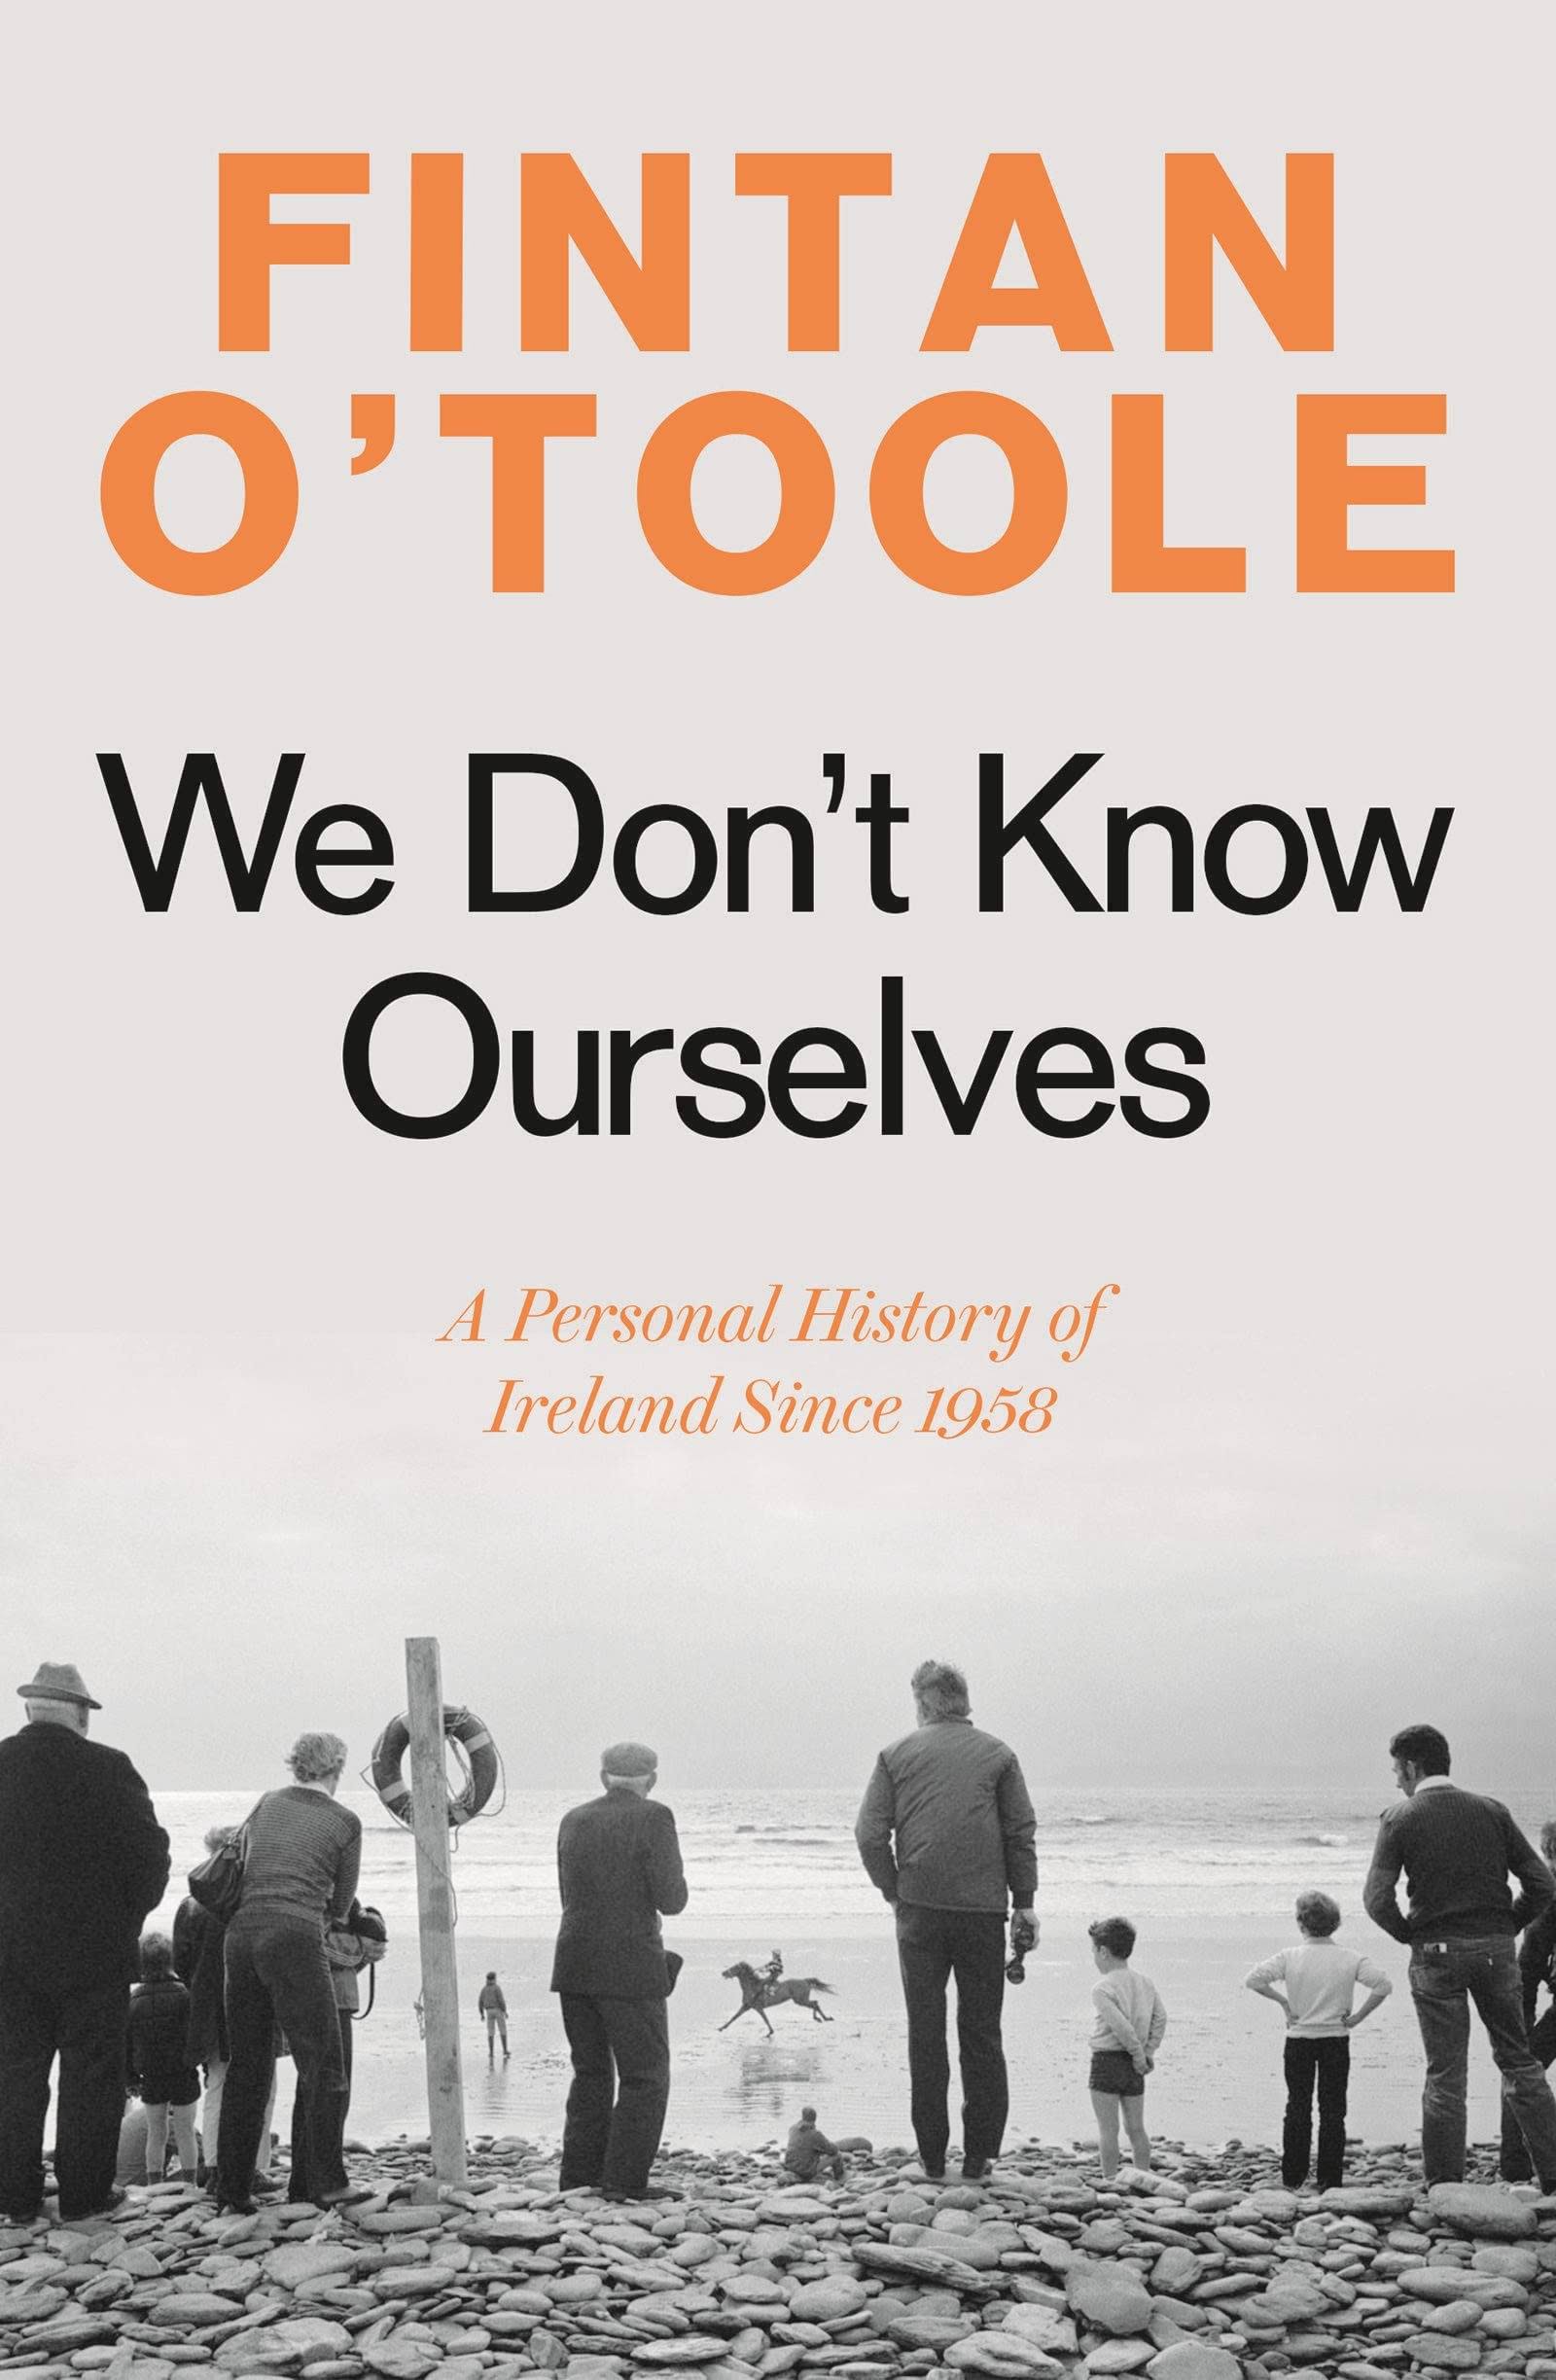 We Don't Know Ourselves: A Personal History of Ireland Since 1958 [Book]